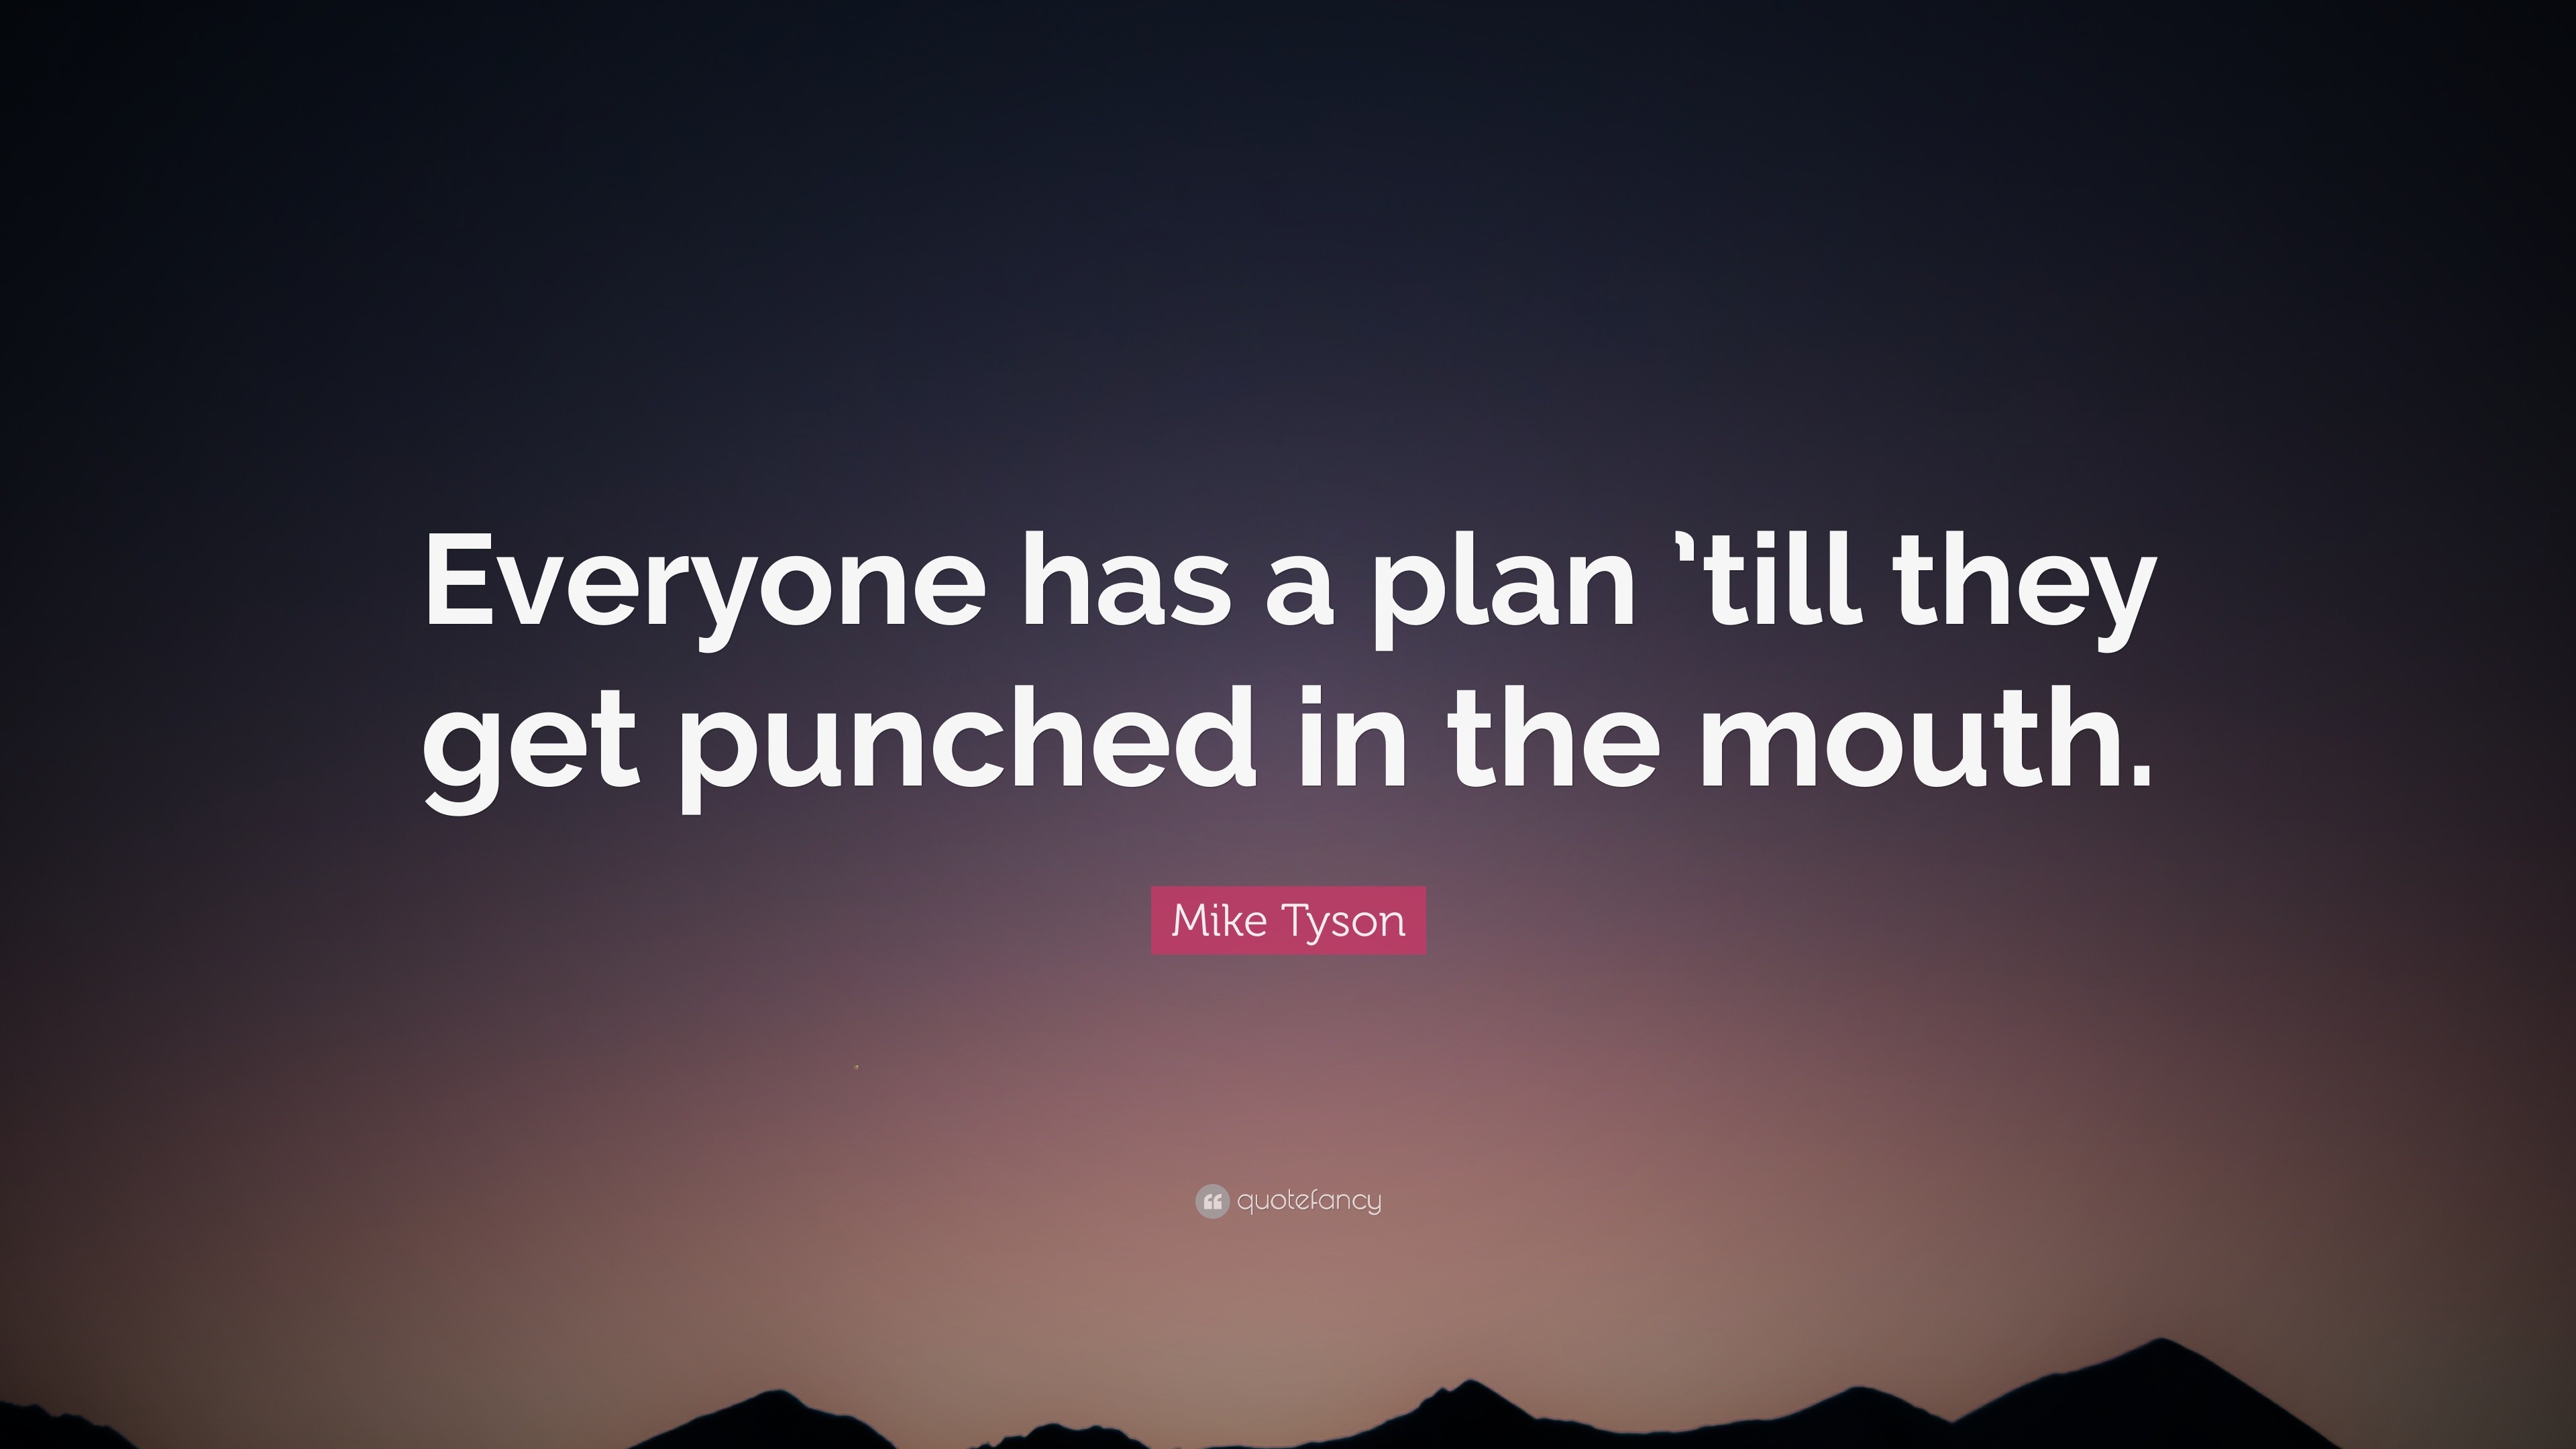 Mike Tyson Quote U1ceveryone Has A Plan U19till They Get 2 Quotes